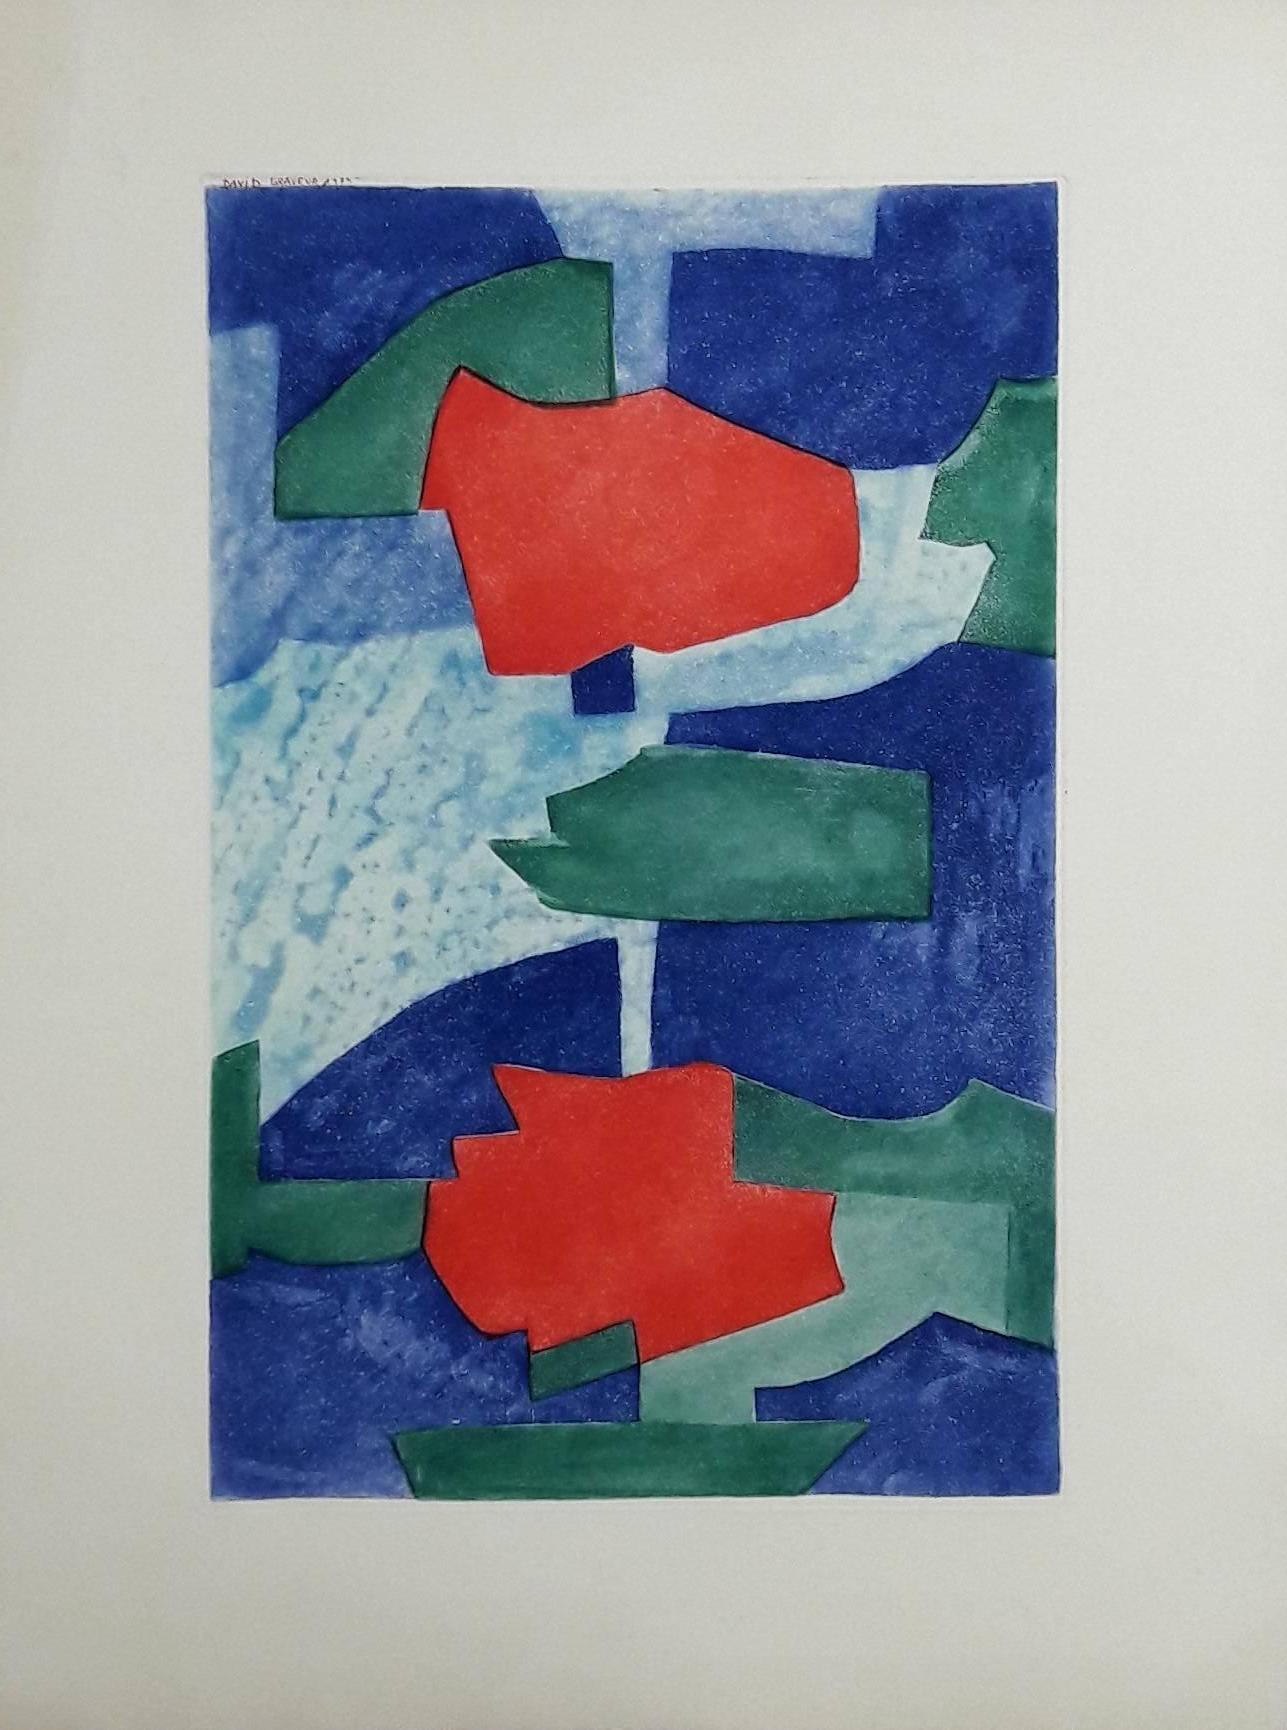 Serge Poliakoff Abstract Print - Composition Bleue, Verte et Rouge - Etching - 150 copies